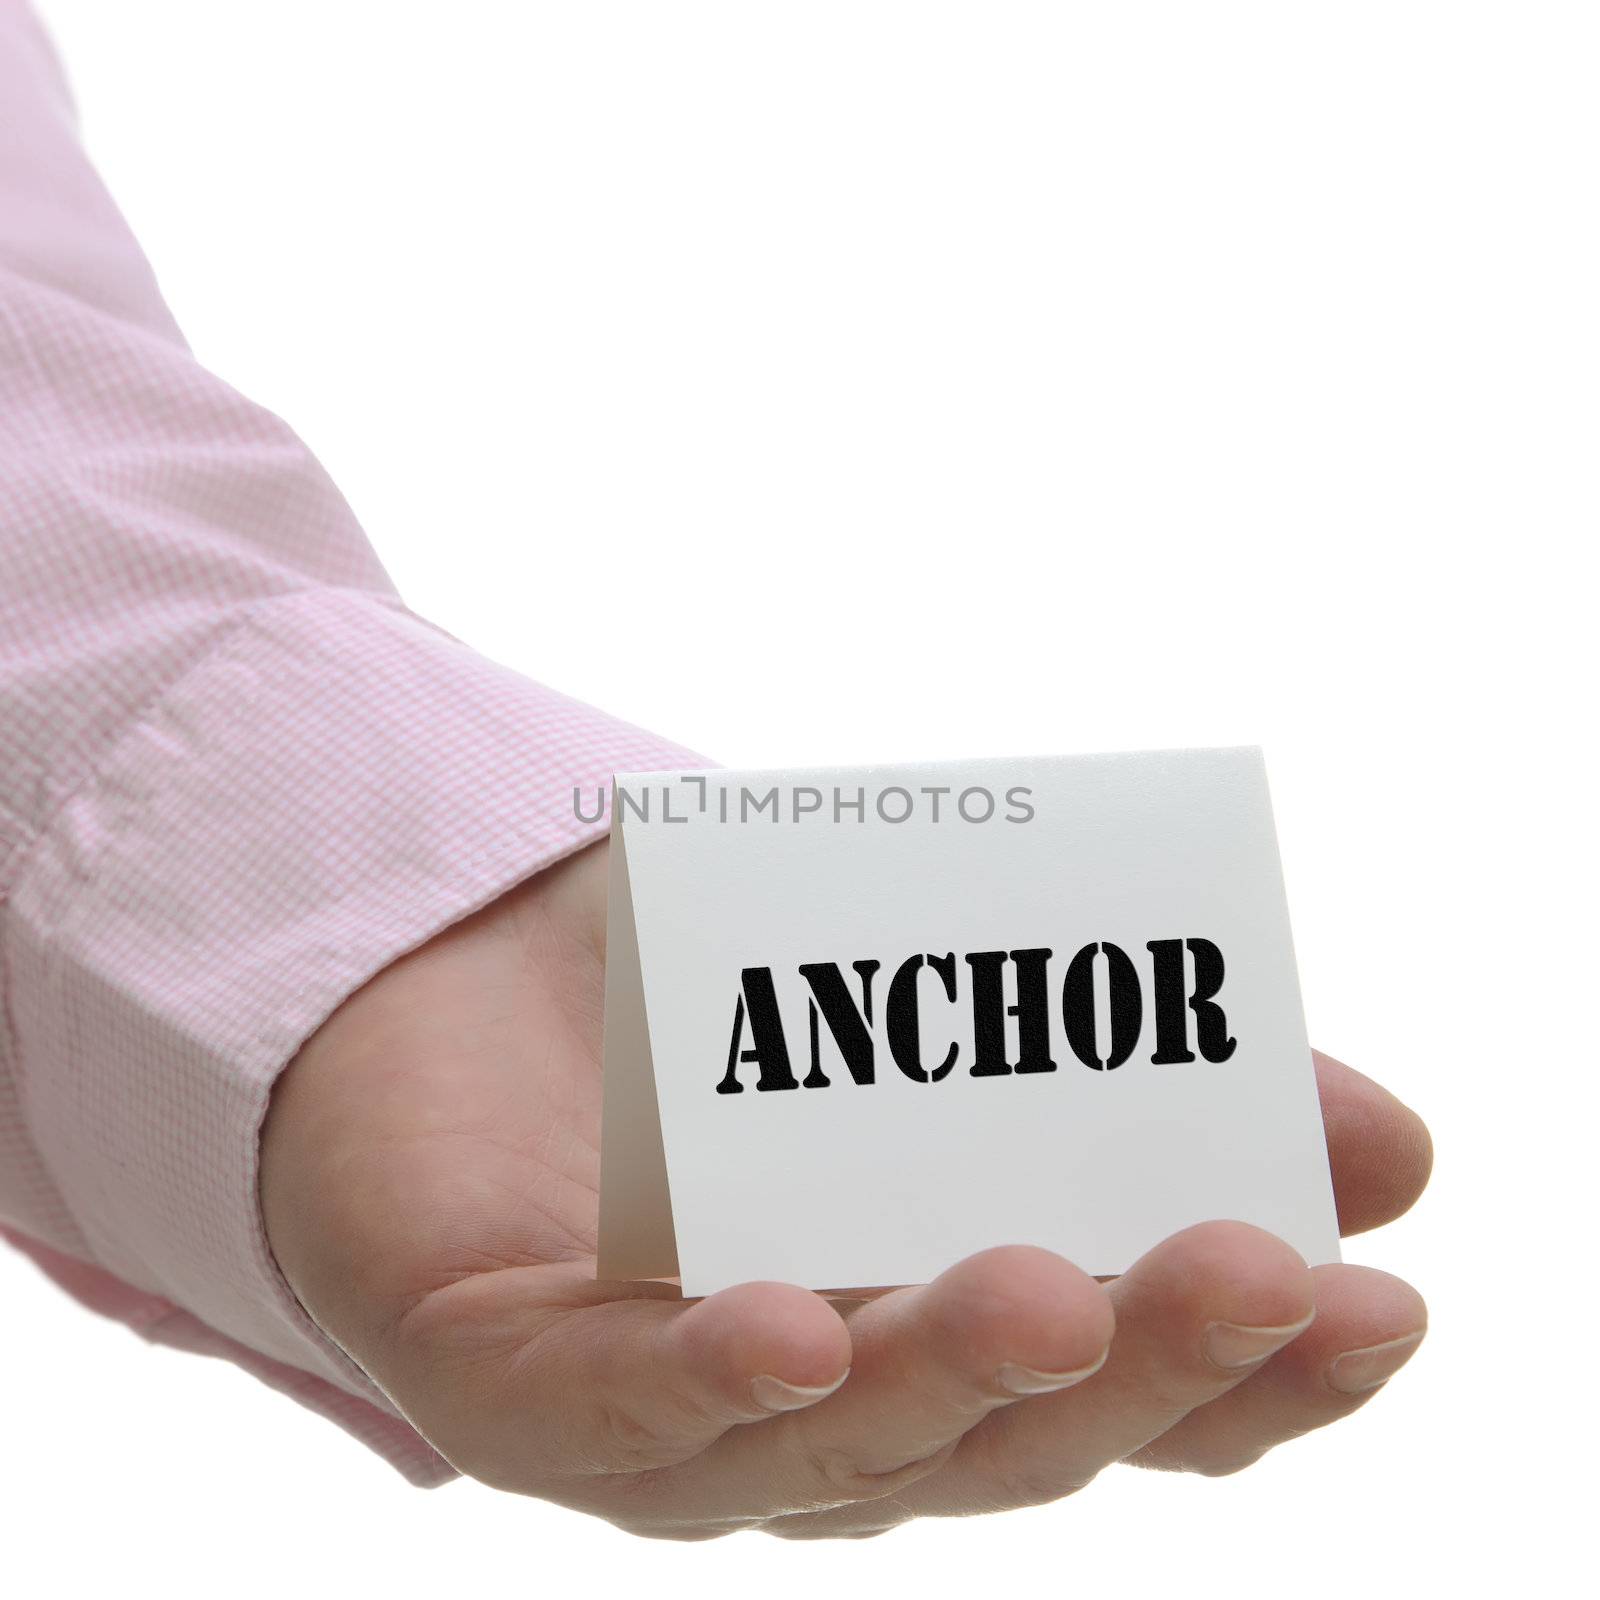 Business man holding anchor sign